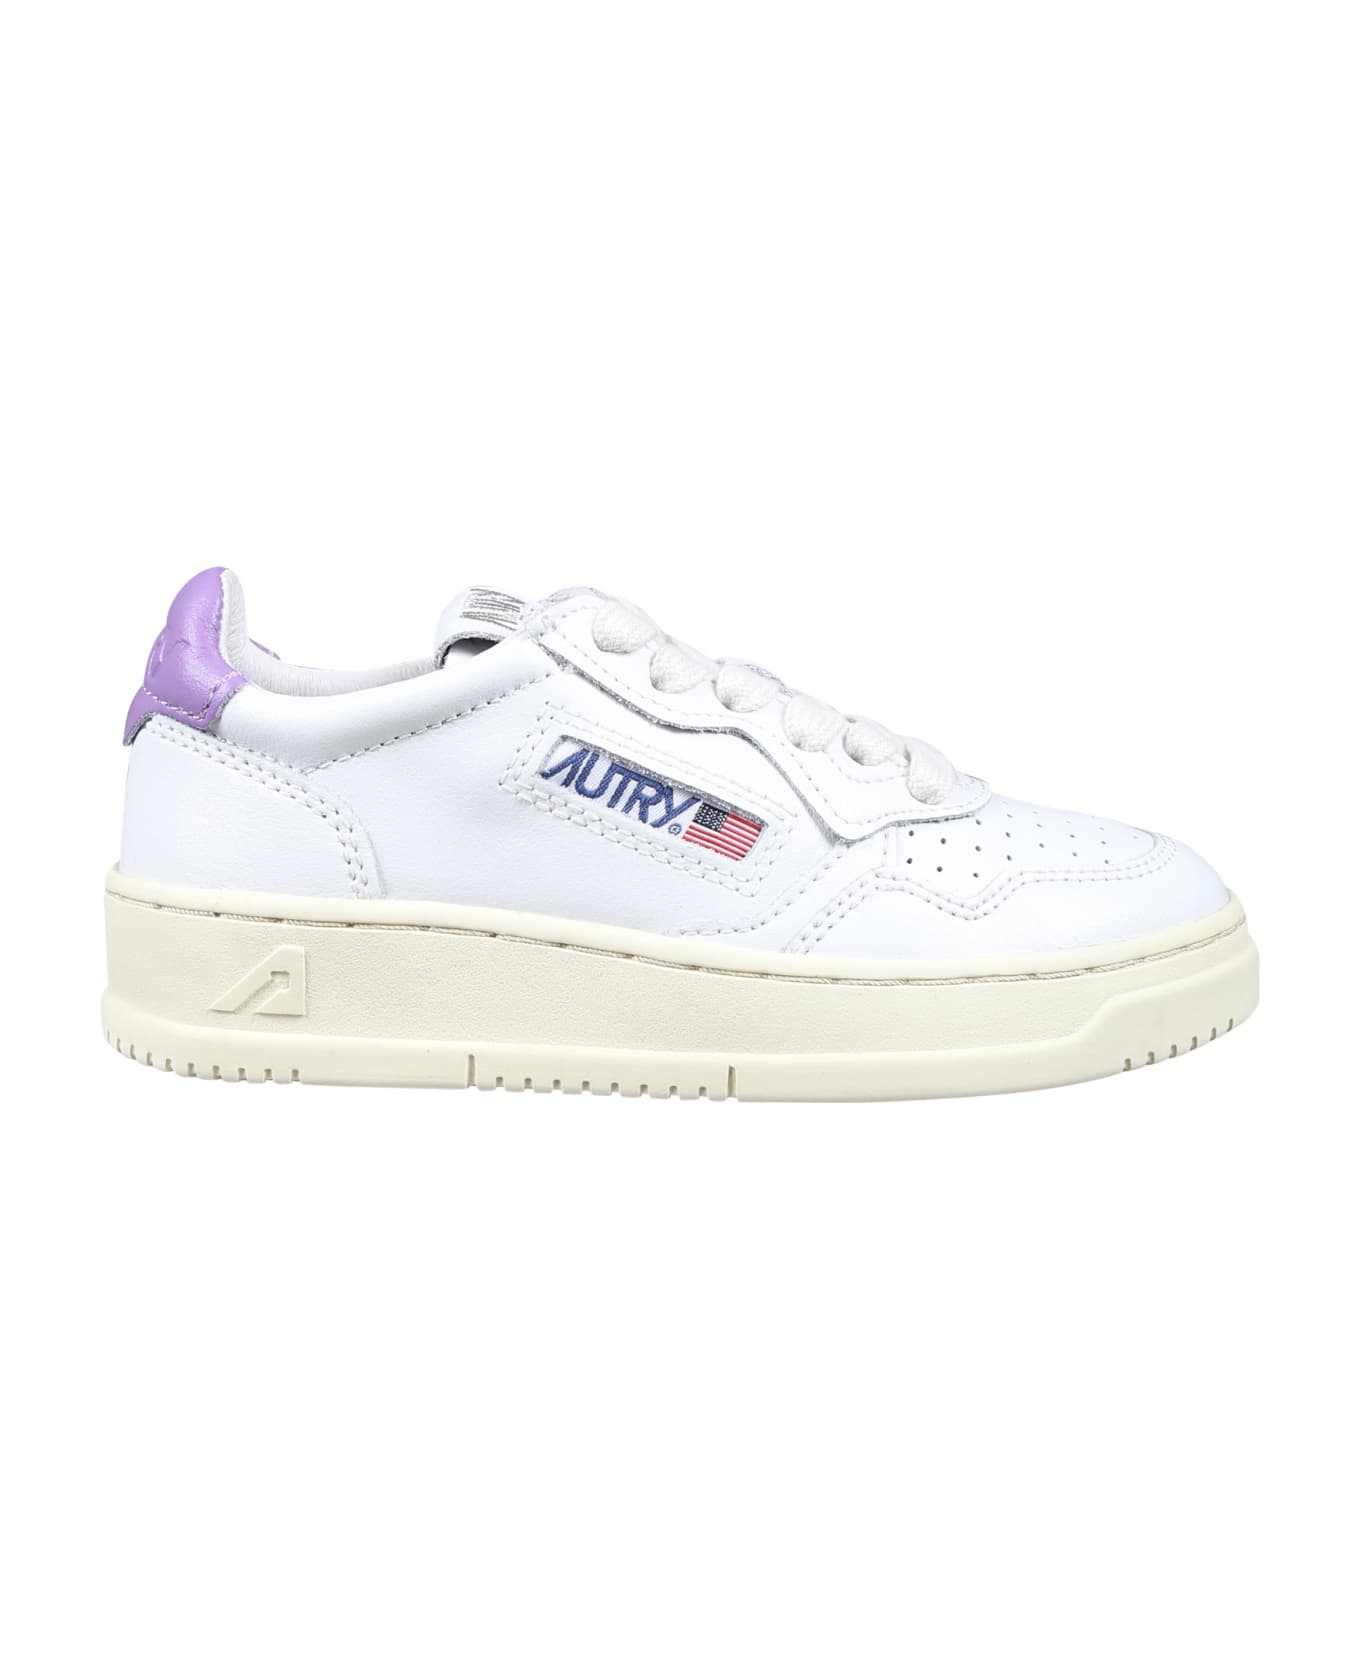 Autry Medalist Low Sneakers For Kids - LILAC